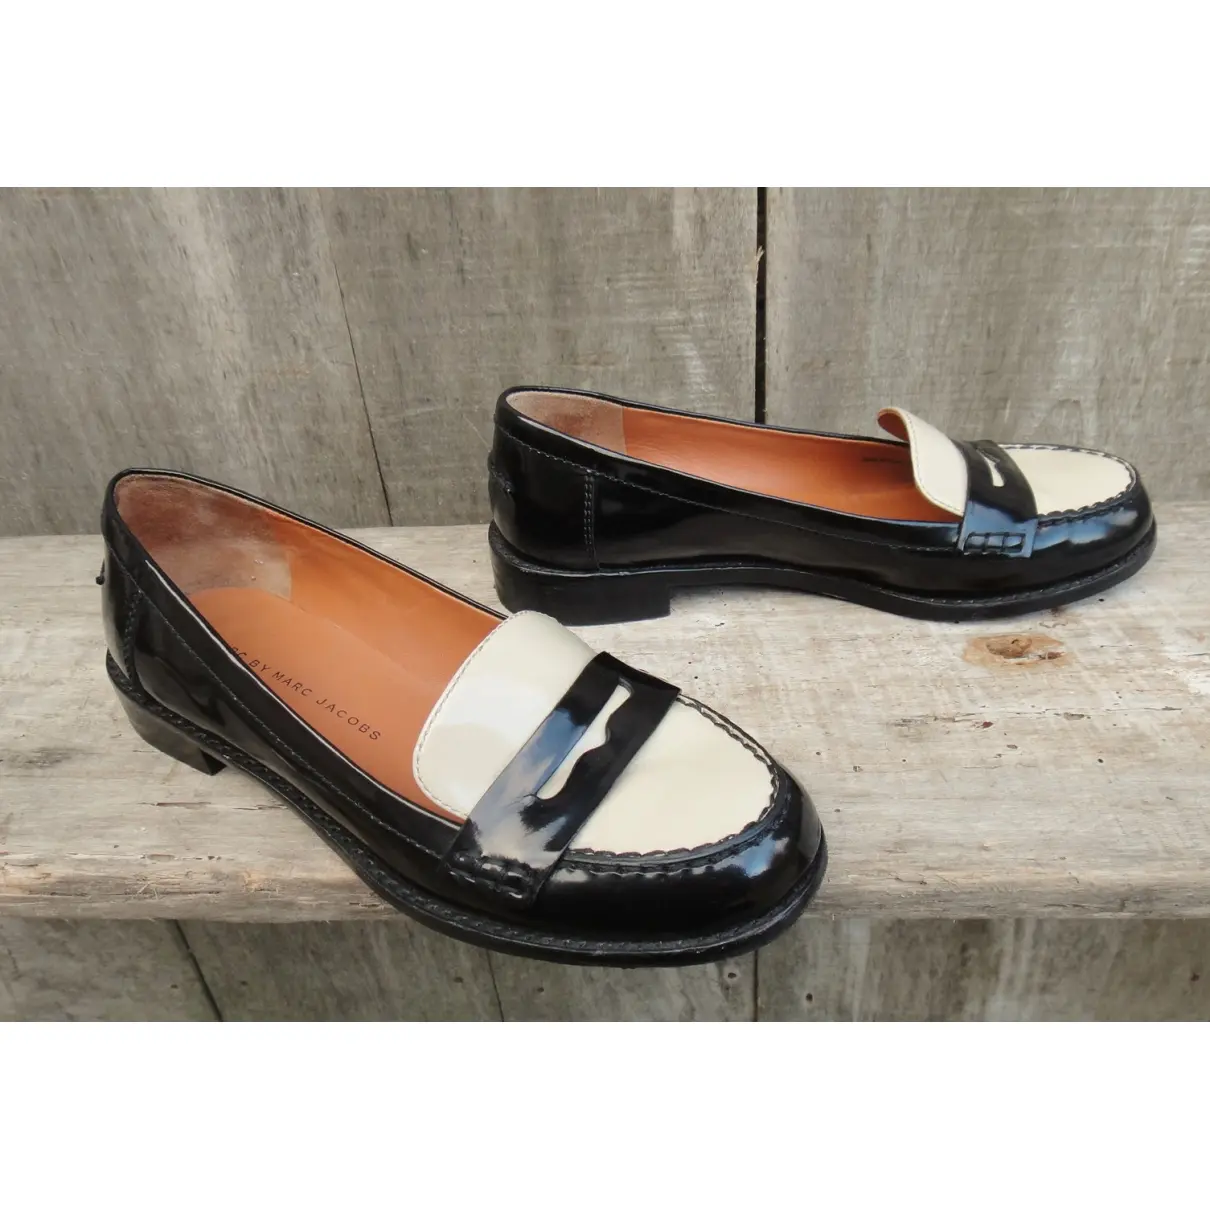 Marc by Marc Jacobs Patent leather flats for sale